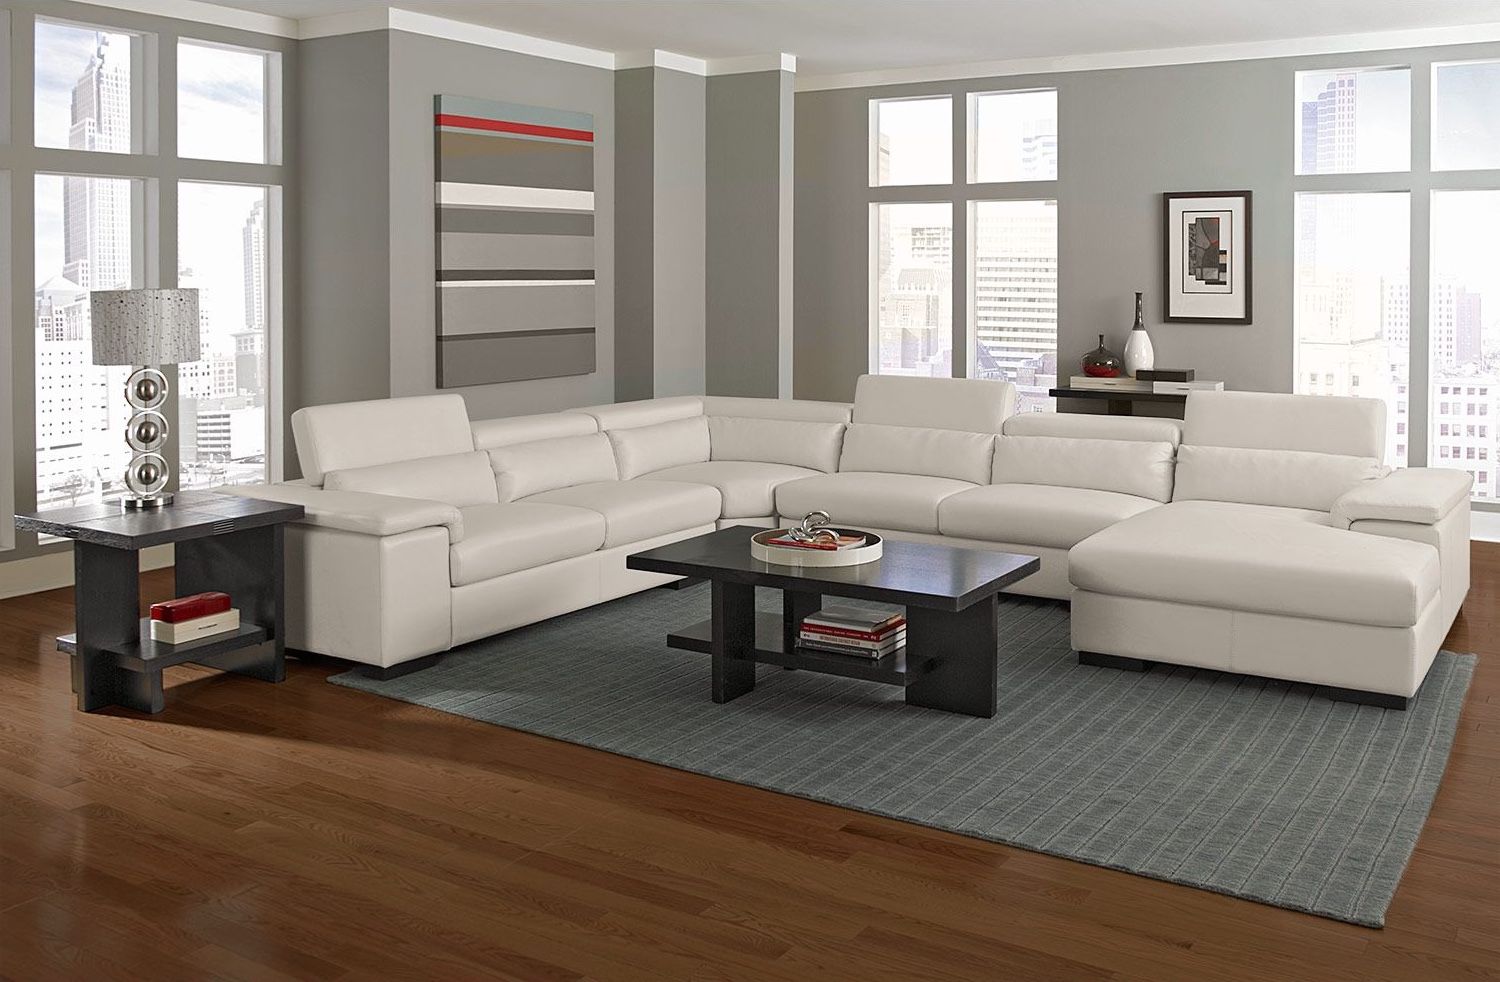 4 Piece White Leather Sectional